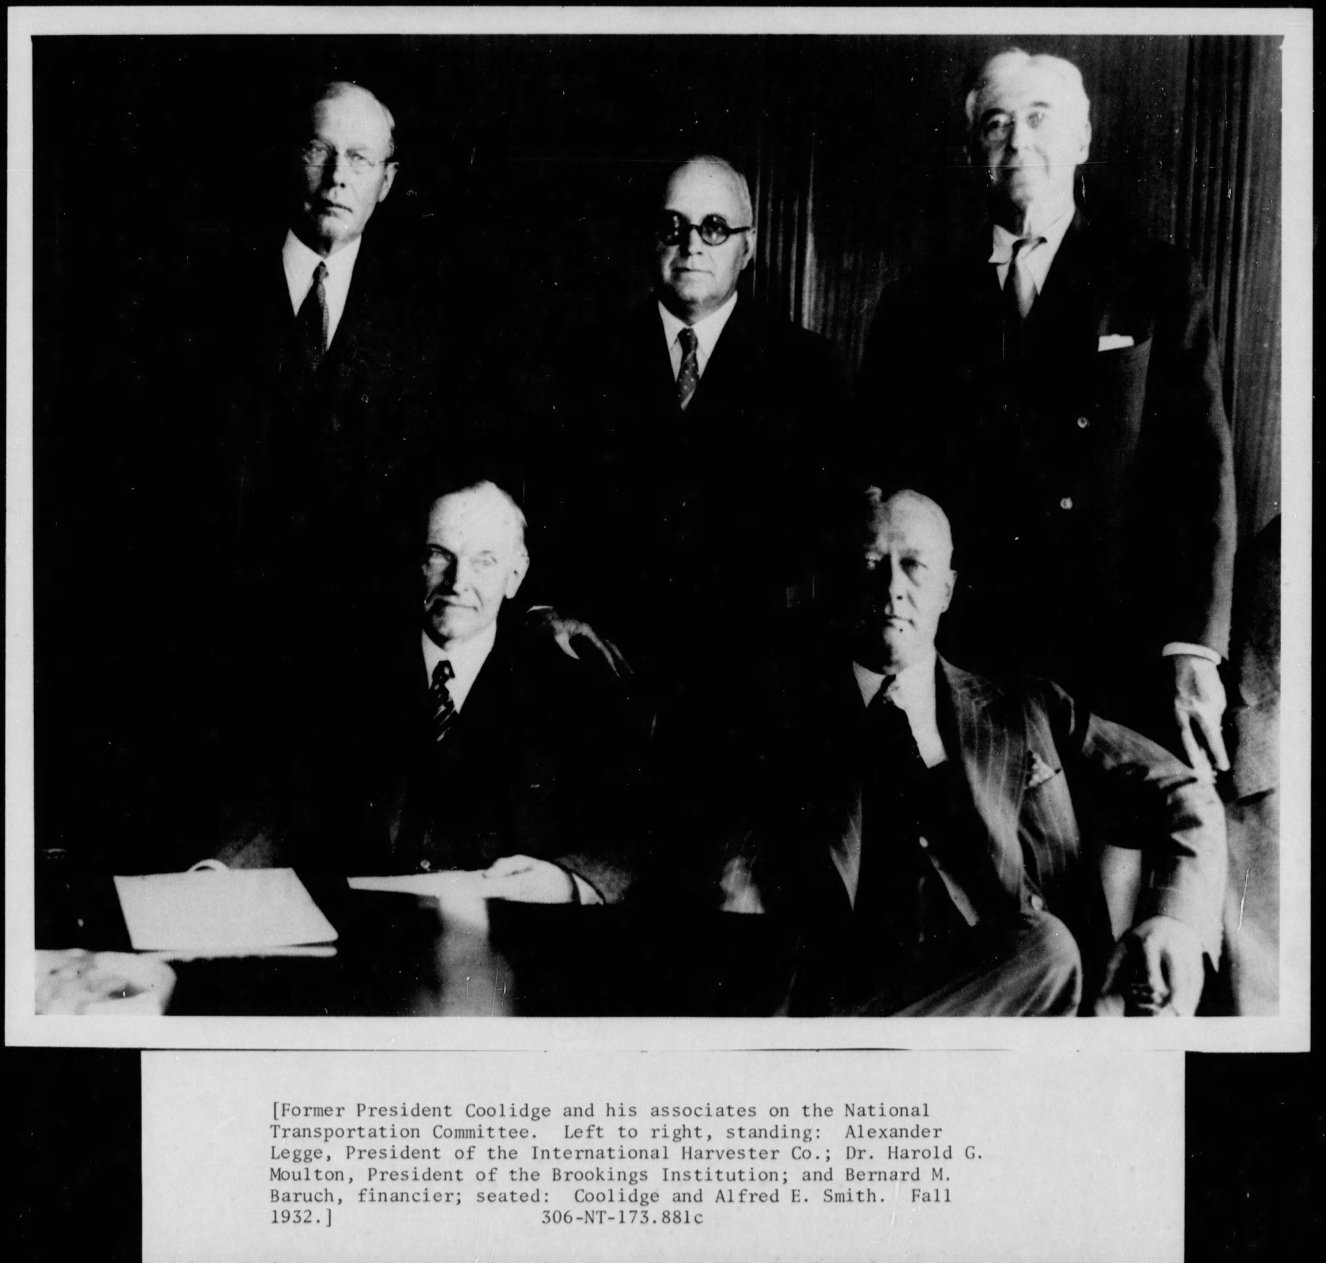 Mr. Coolidge was selected to chair the National Transportation Committee after his service in the White House but he warns fellow member Mr. Baruch against where committee proposals could very easily go, if allowed to do so. Photo courtesy of the National Archives. 